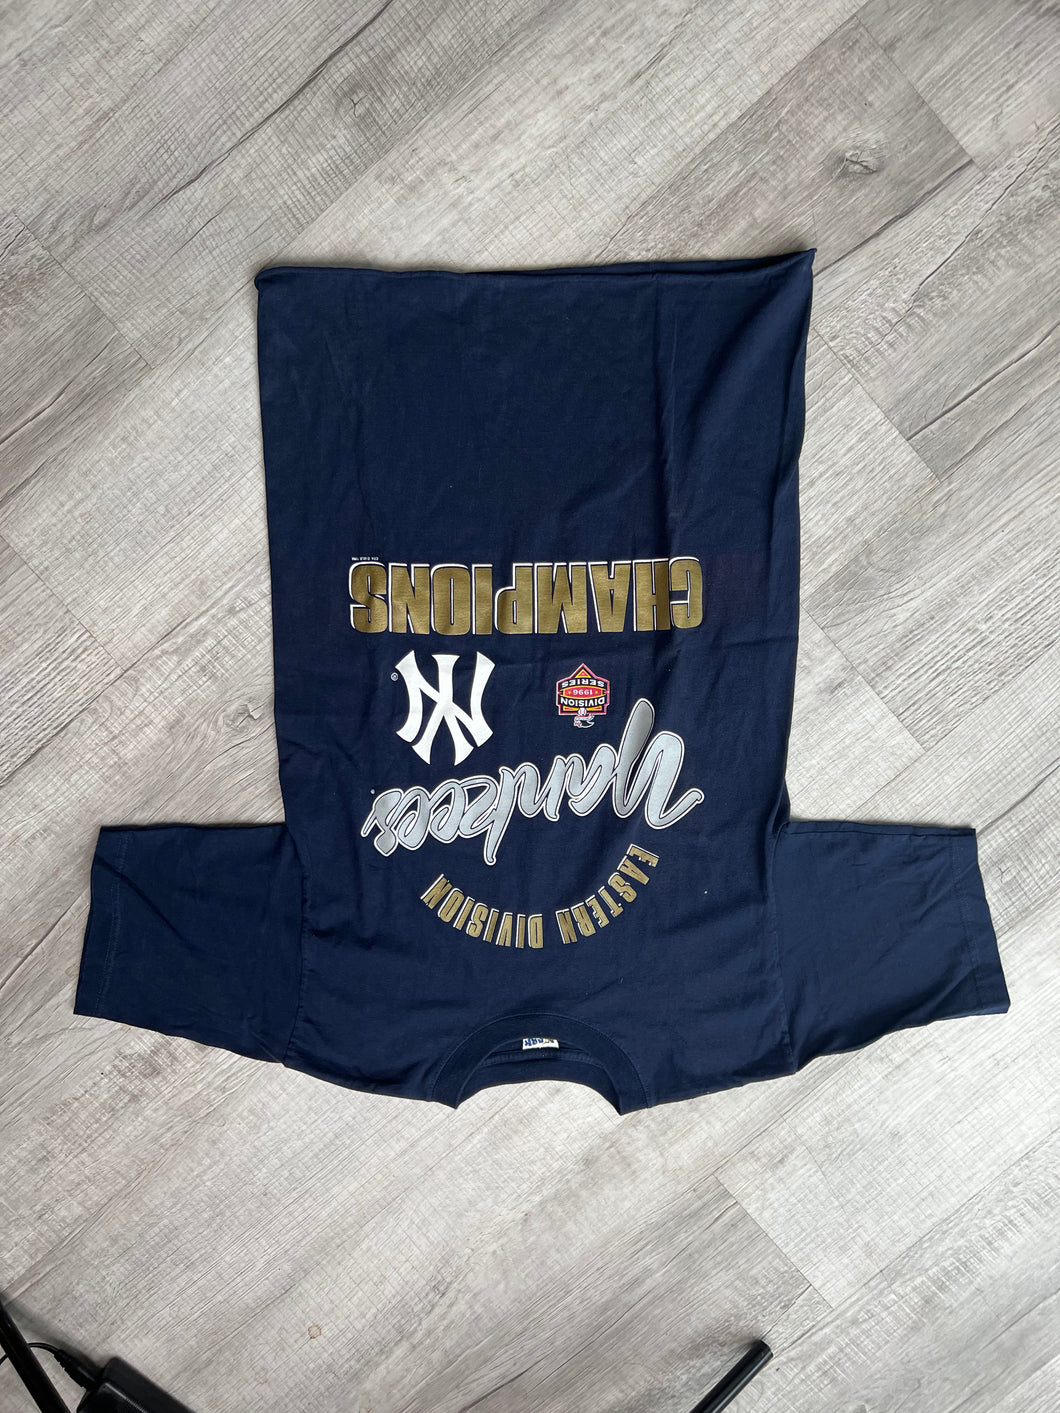 Eastern Division Yankees Champions T-shirt